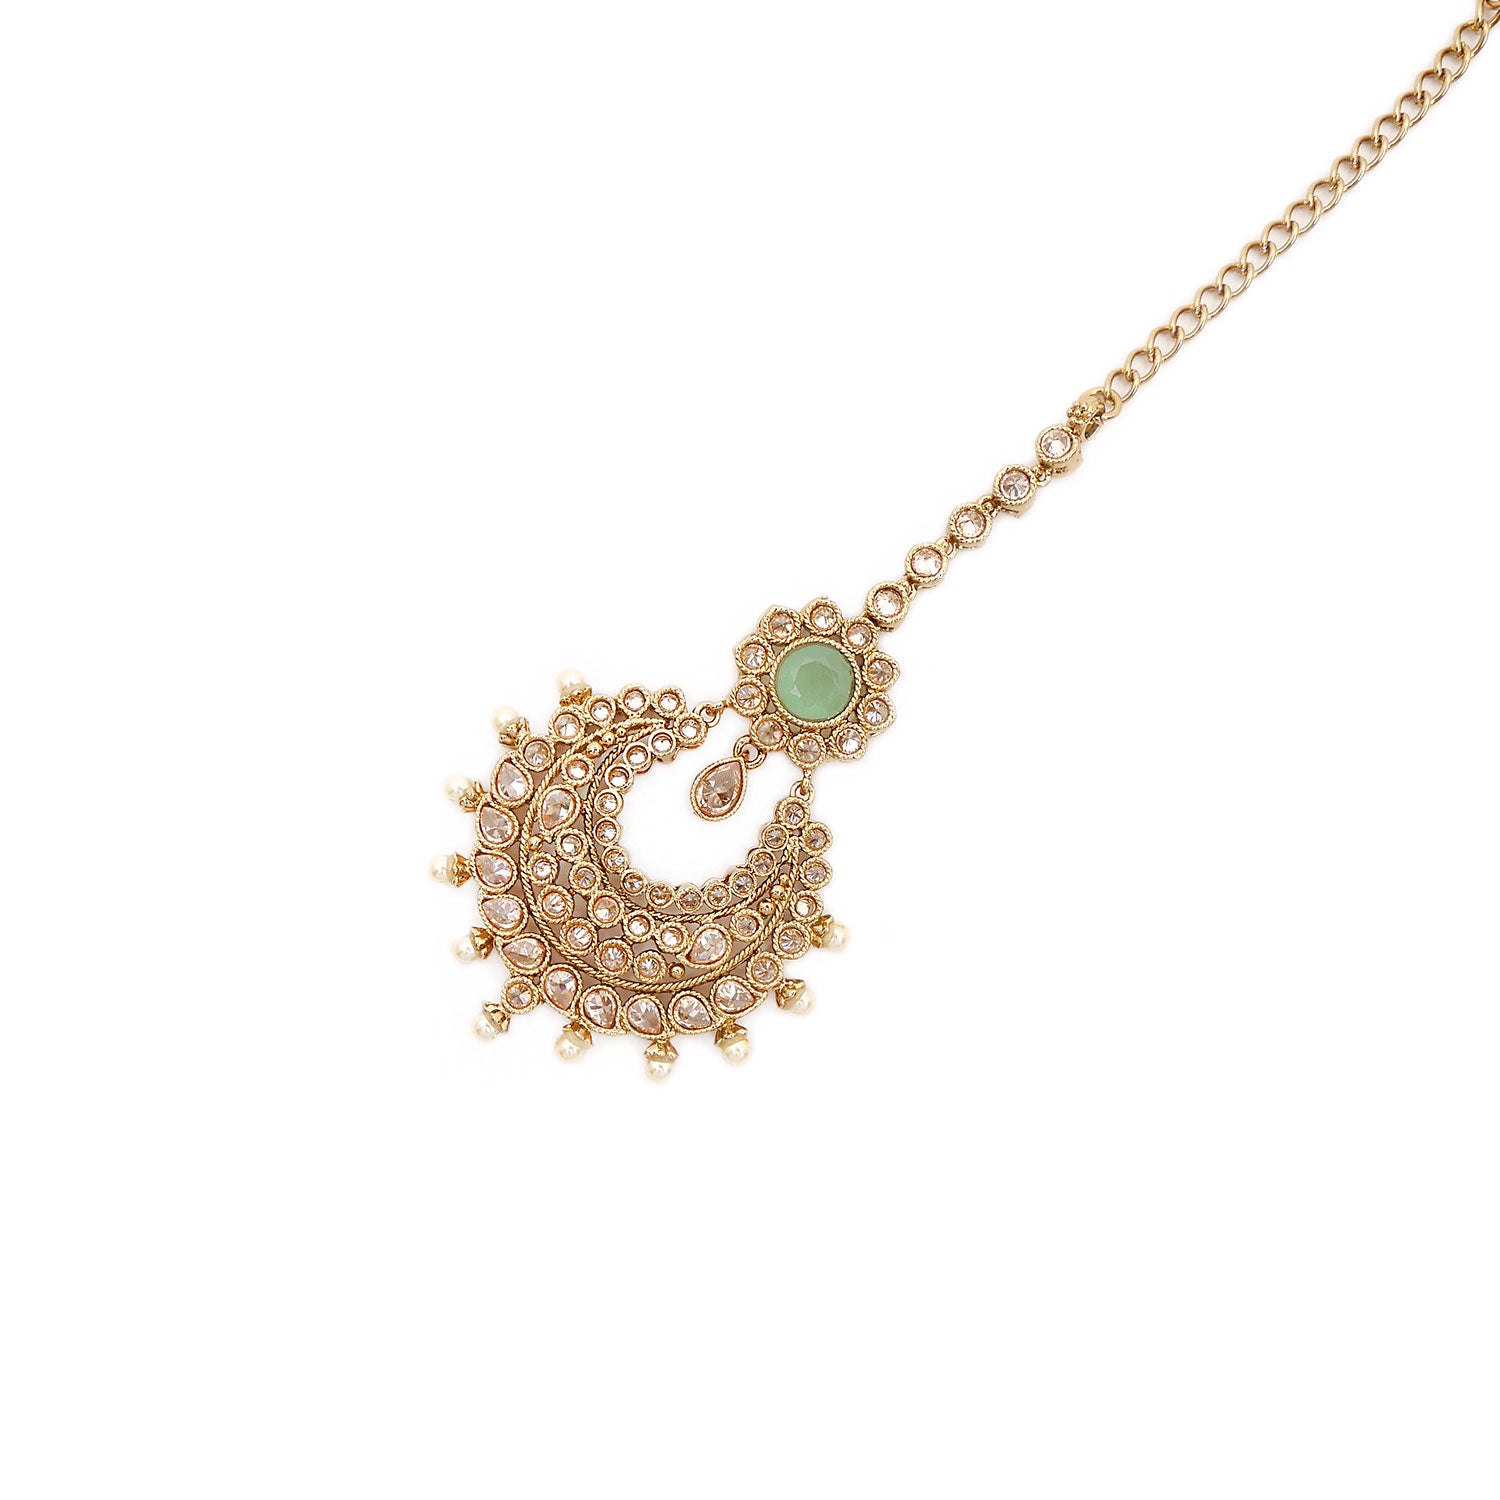 Chand Tikka in Pearl and Mint